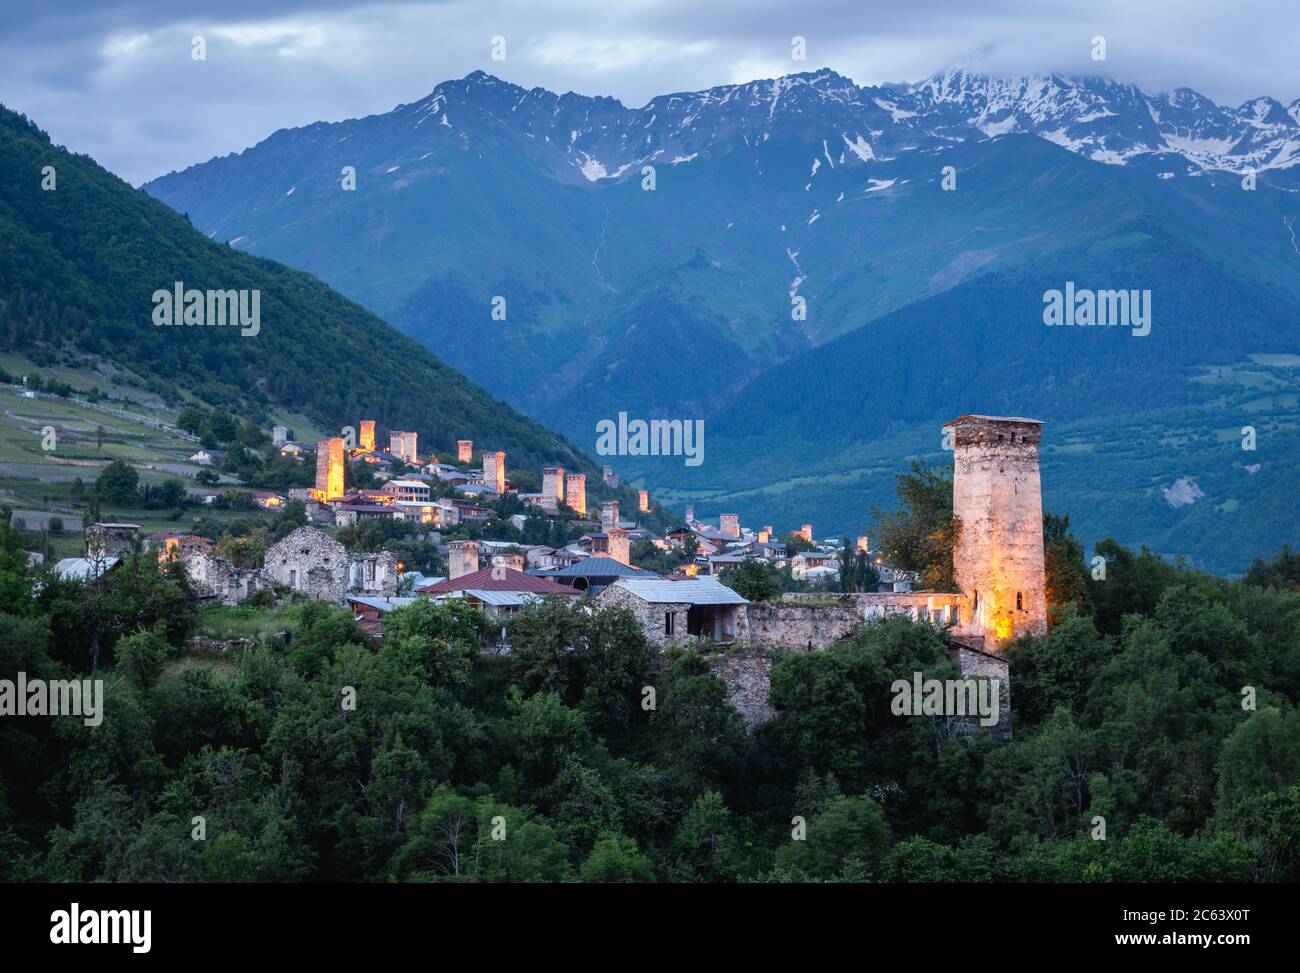 Dusk view of the Svanetian towers in Mestia with the mighty Caucasus Mountains in the background, Svanetia, Georgia. Stock Photo